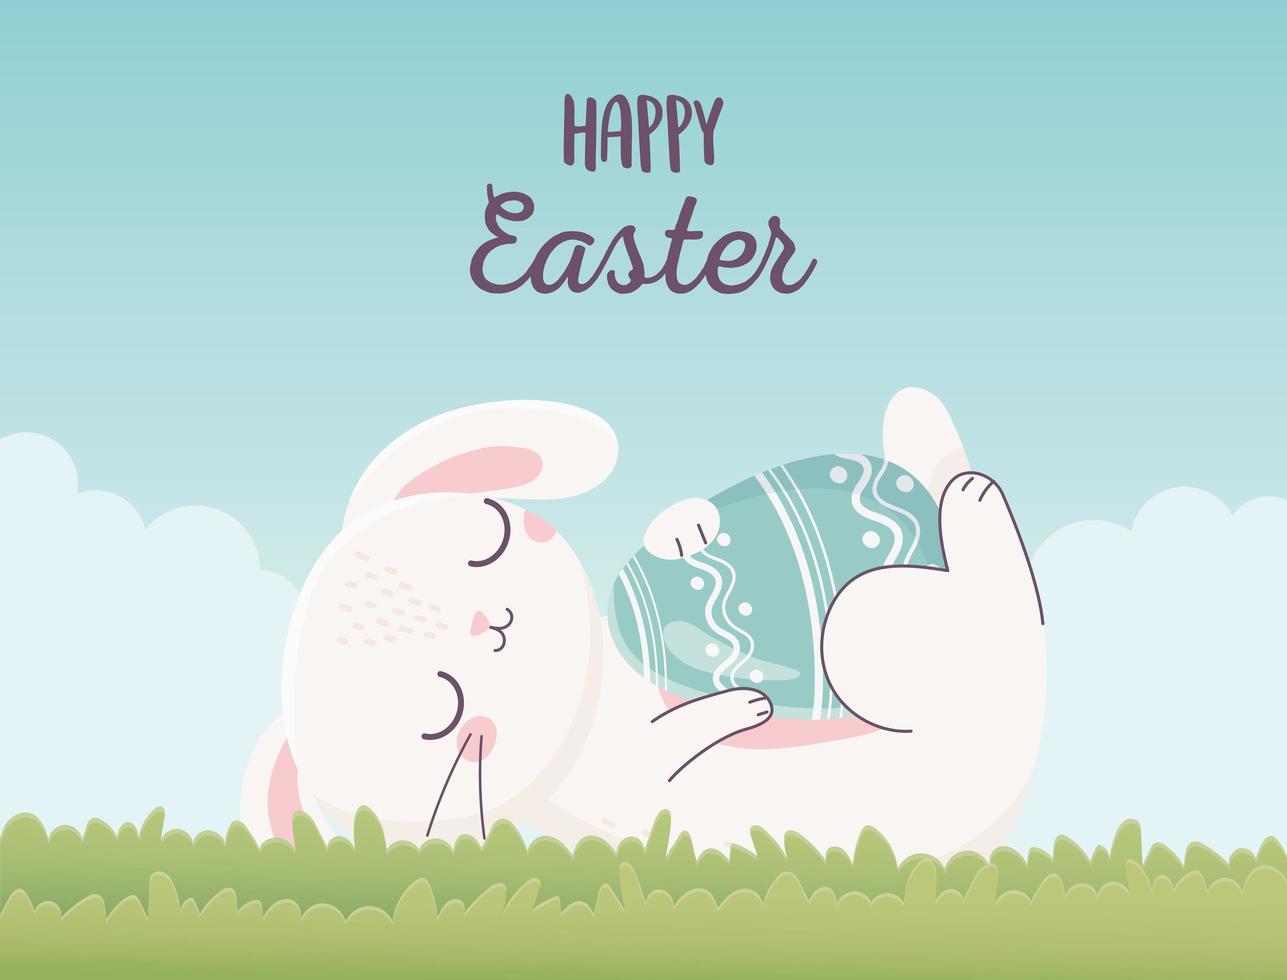 happy easter sleeping rabbit with egg on grass vector